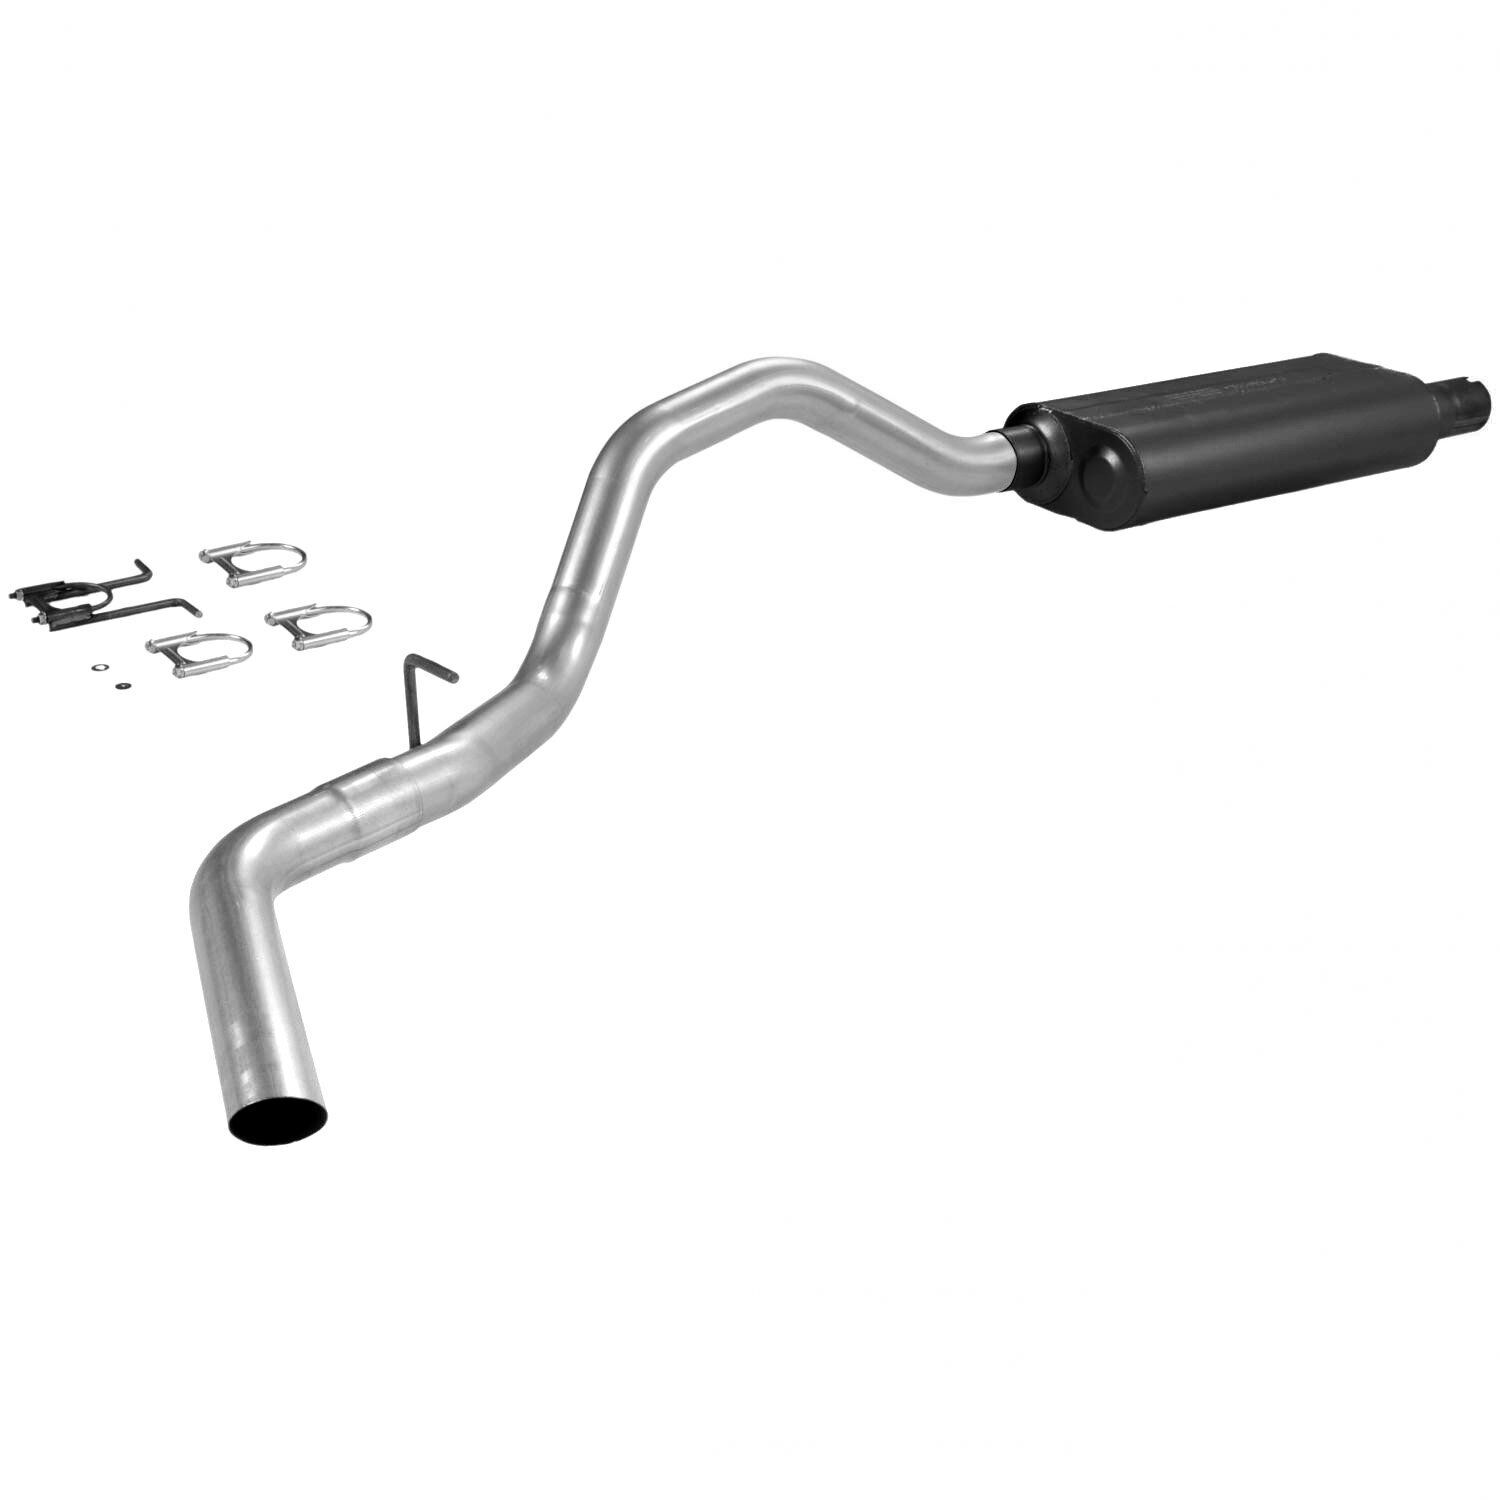 Flowmaster 17229 Force II Cat-back Exhaust System